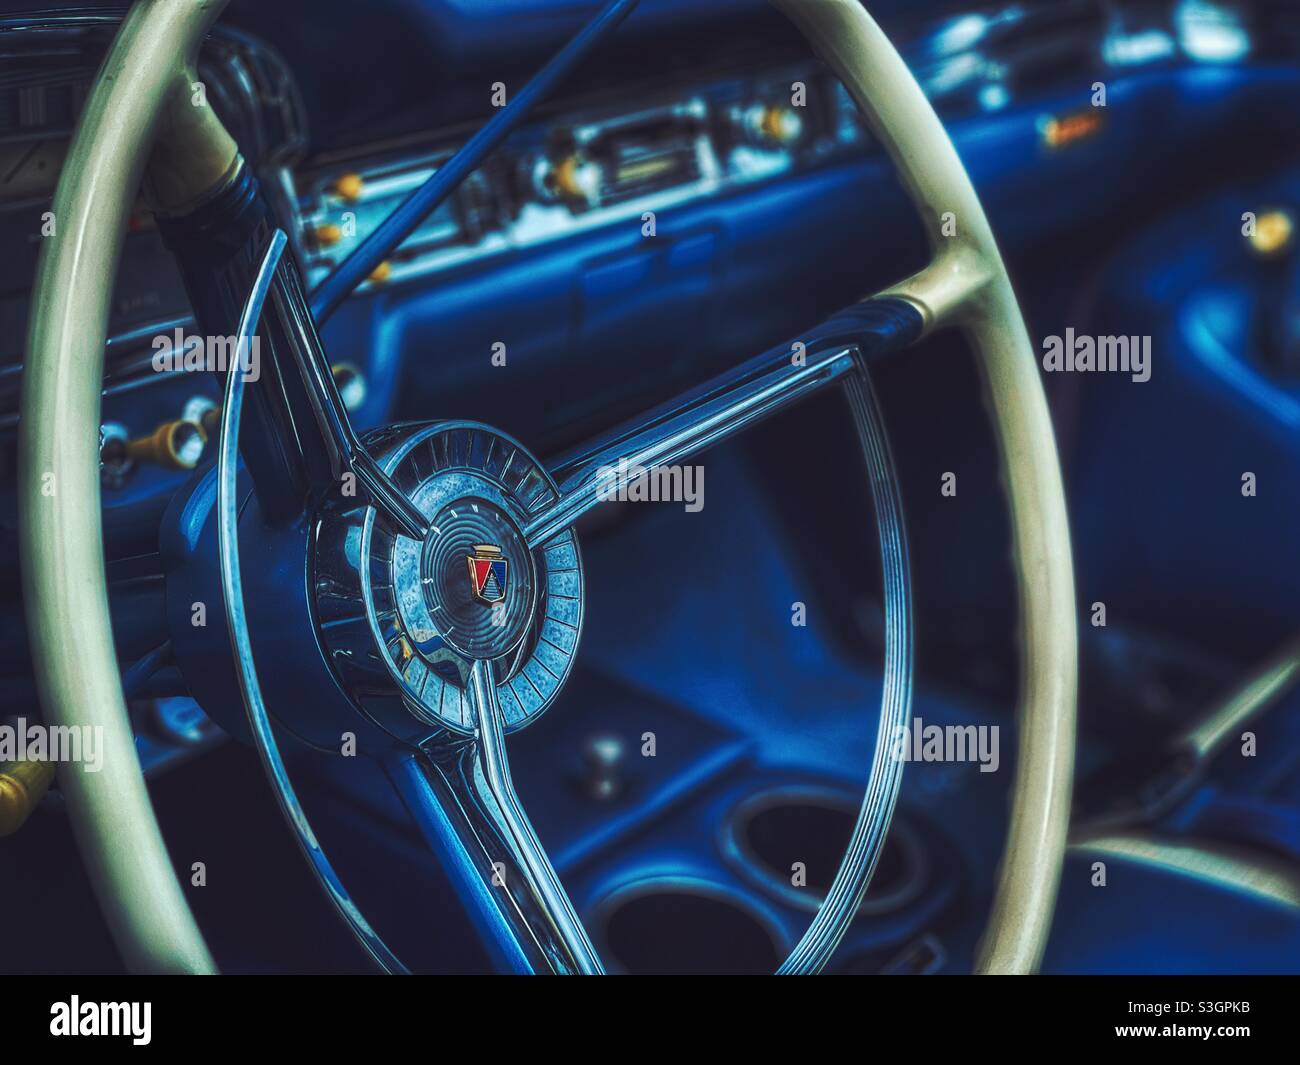 Moody image of a vintage automobile dashboard and steering wheel Stock Photo